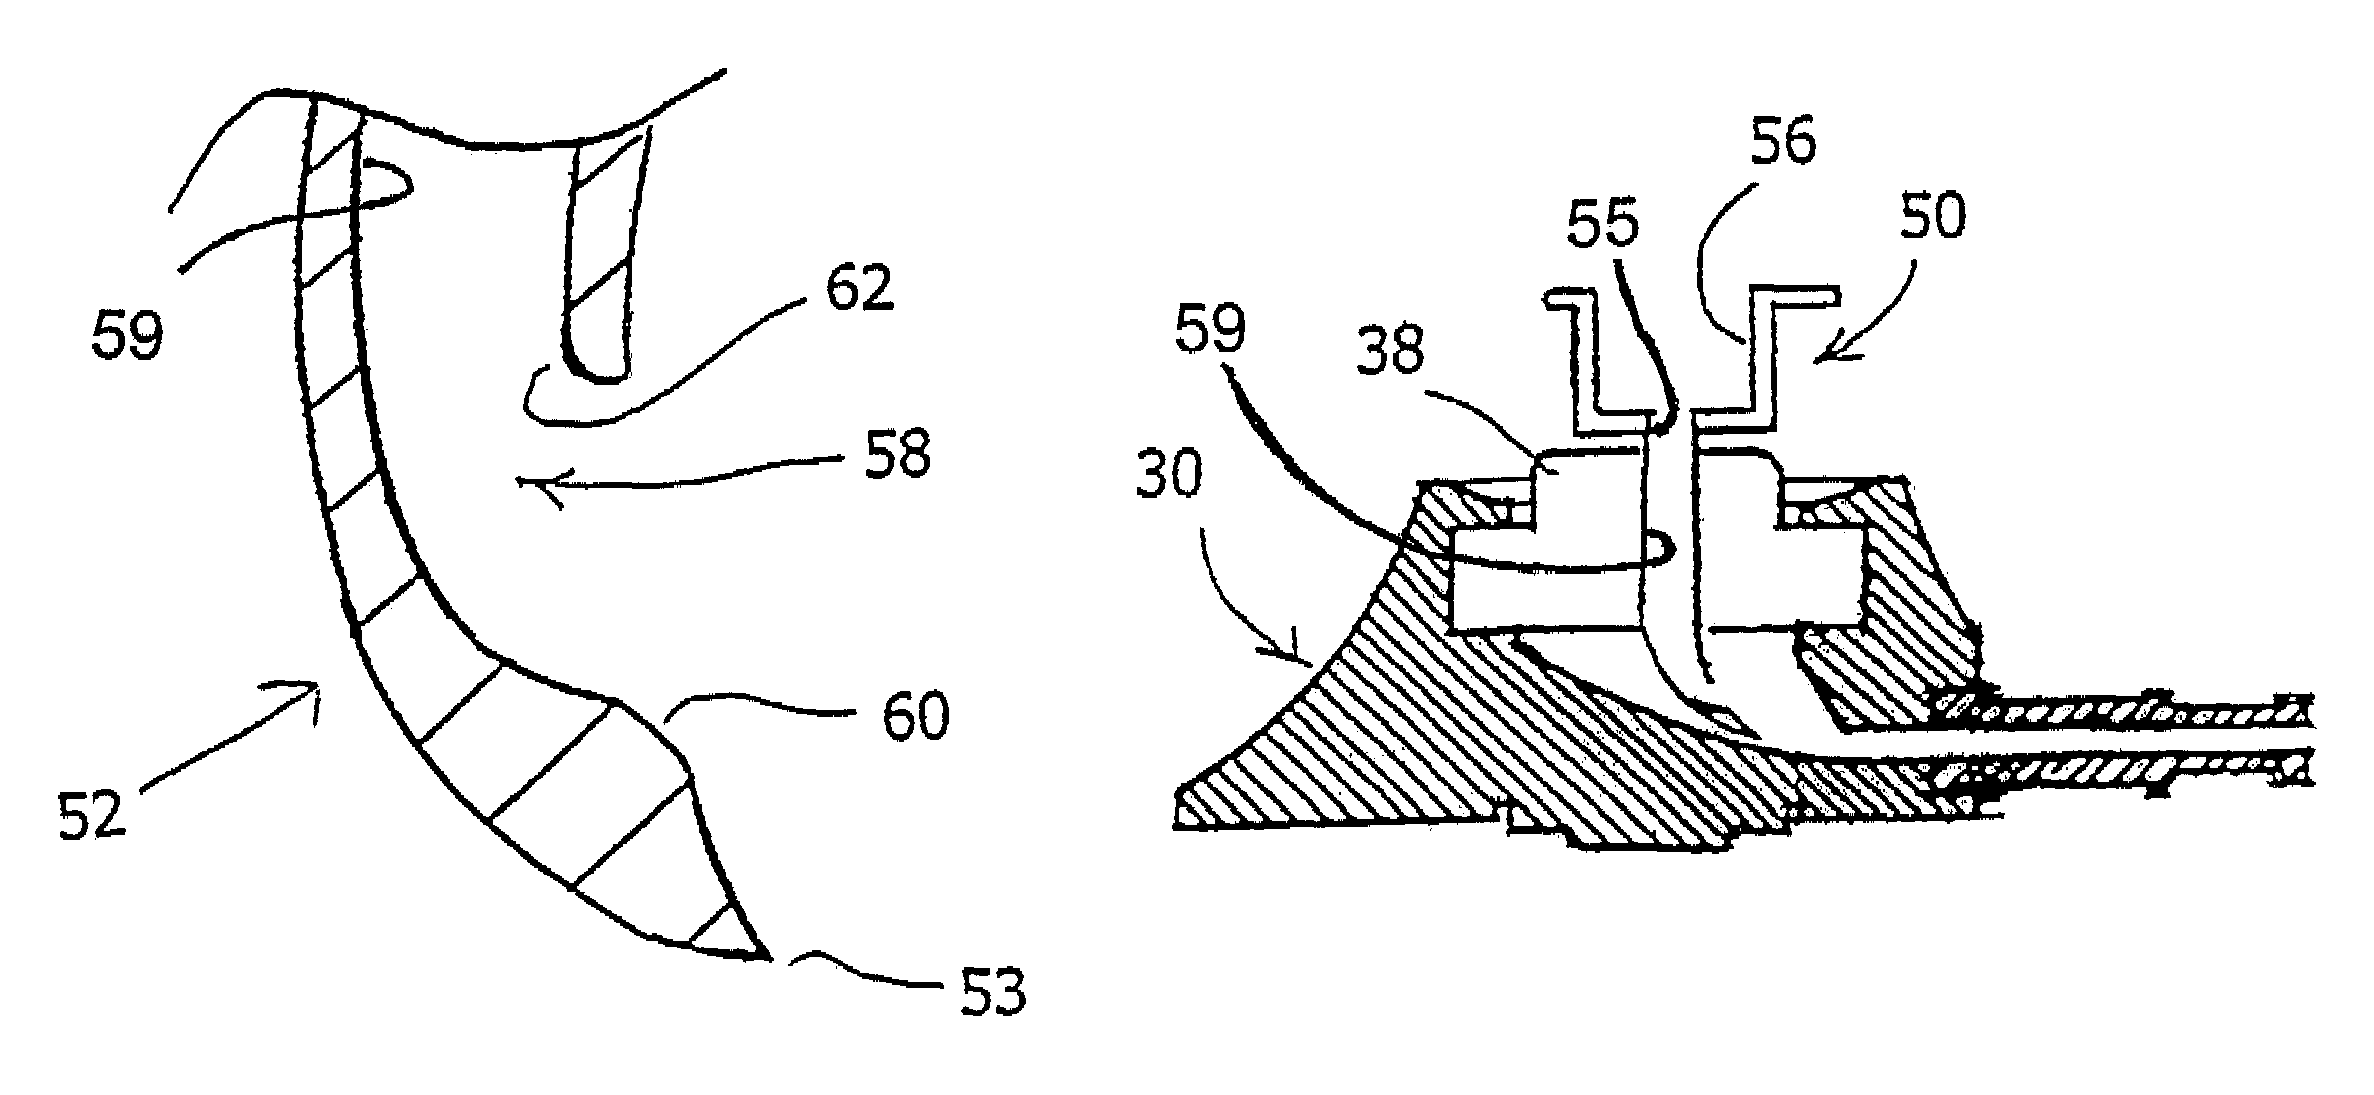 Subcutaneous vascular access port, needle and kit, and methods of using same